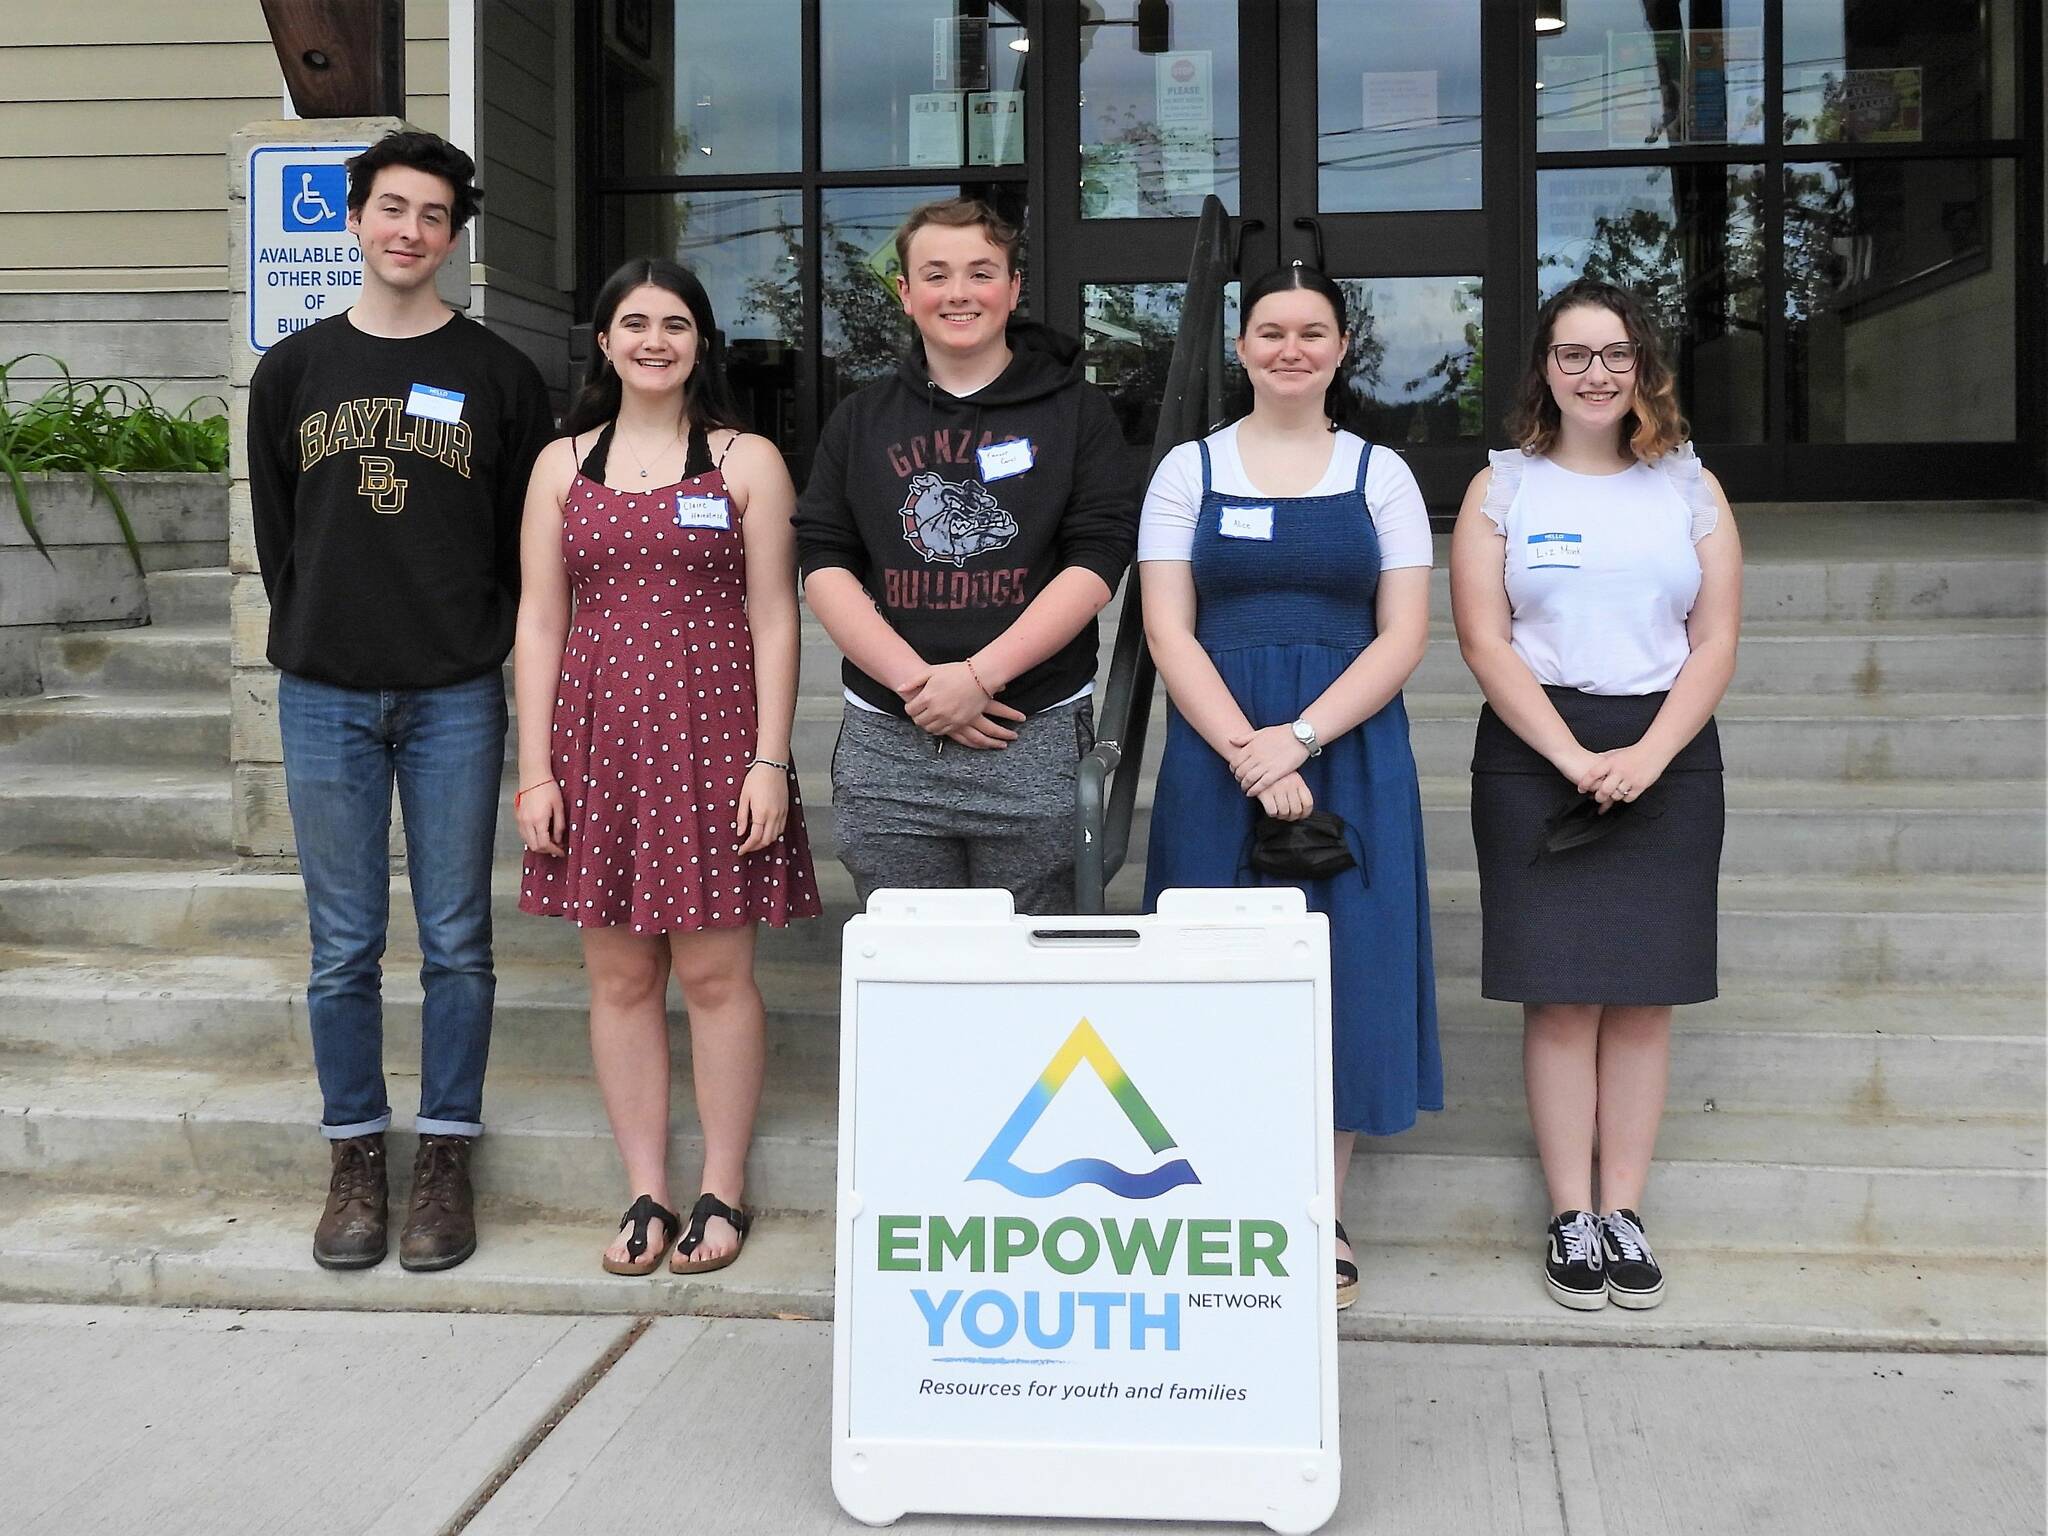 Courtesy photo. Student nominees at the Empower Youth Network 2022 Rise & Shine Volunteer Recognition Breakfast on June 8. From left: Zachary Smith, Claire Haindfield, Tanner Caryl, Alice Lutzenhiser and Elizabeth Monk